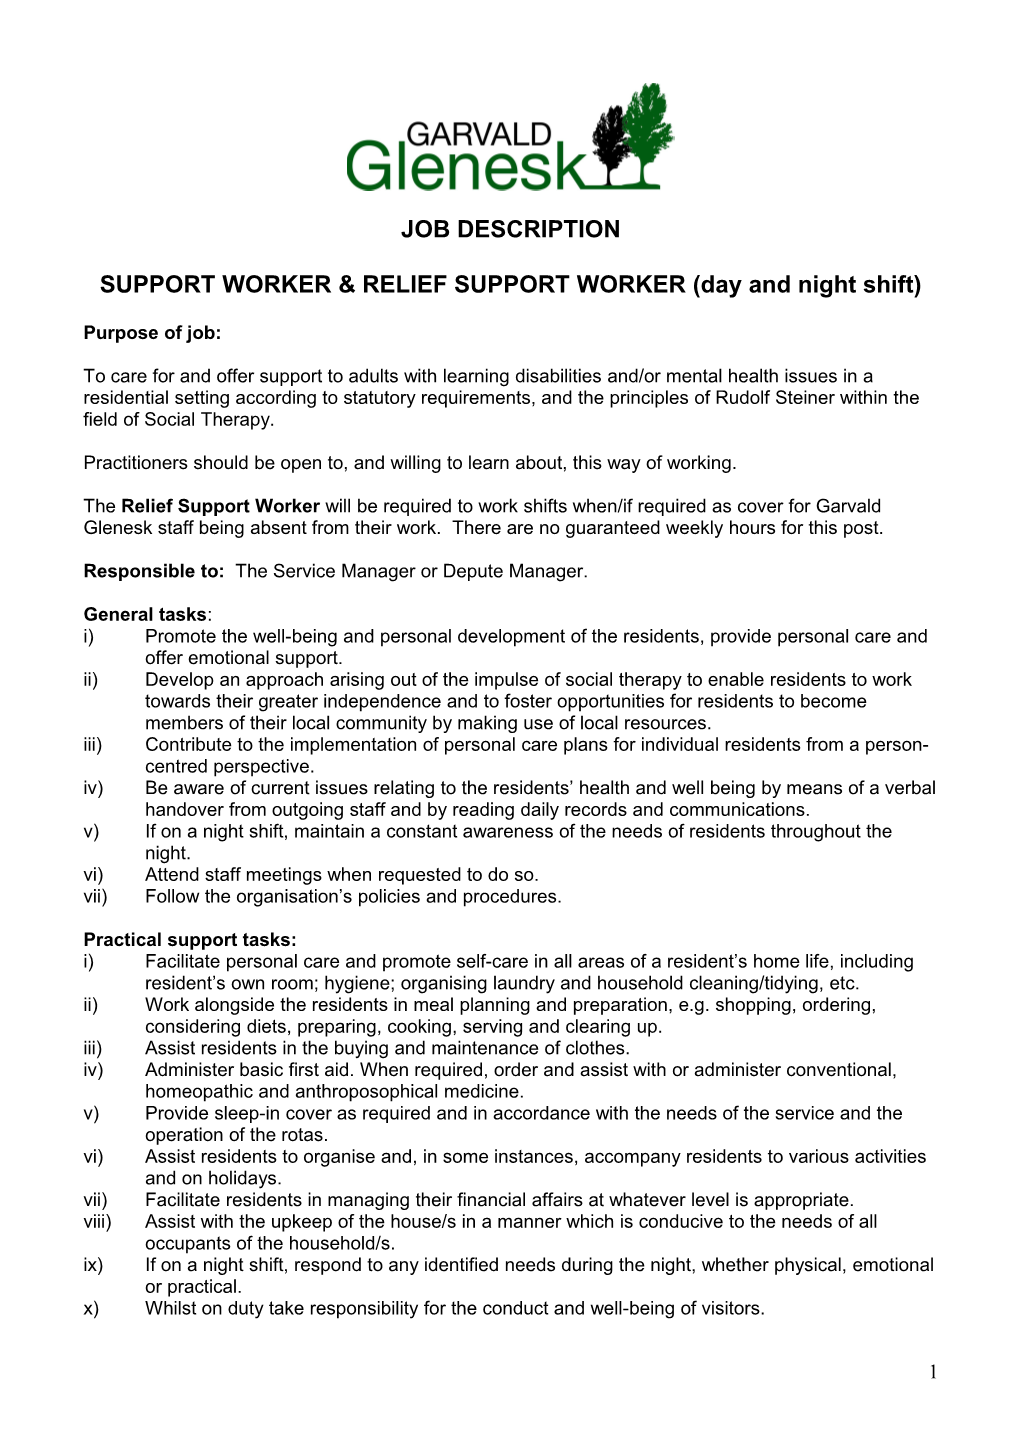 SUPPORT WORKER & RELIEF SUPPORT WORKER (Day and Night Shift)